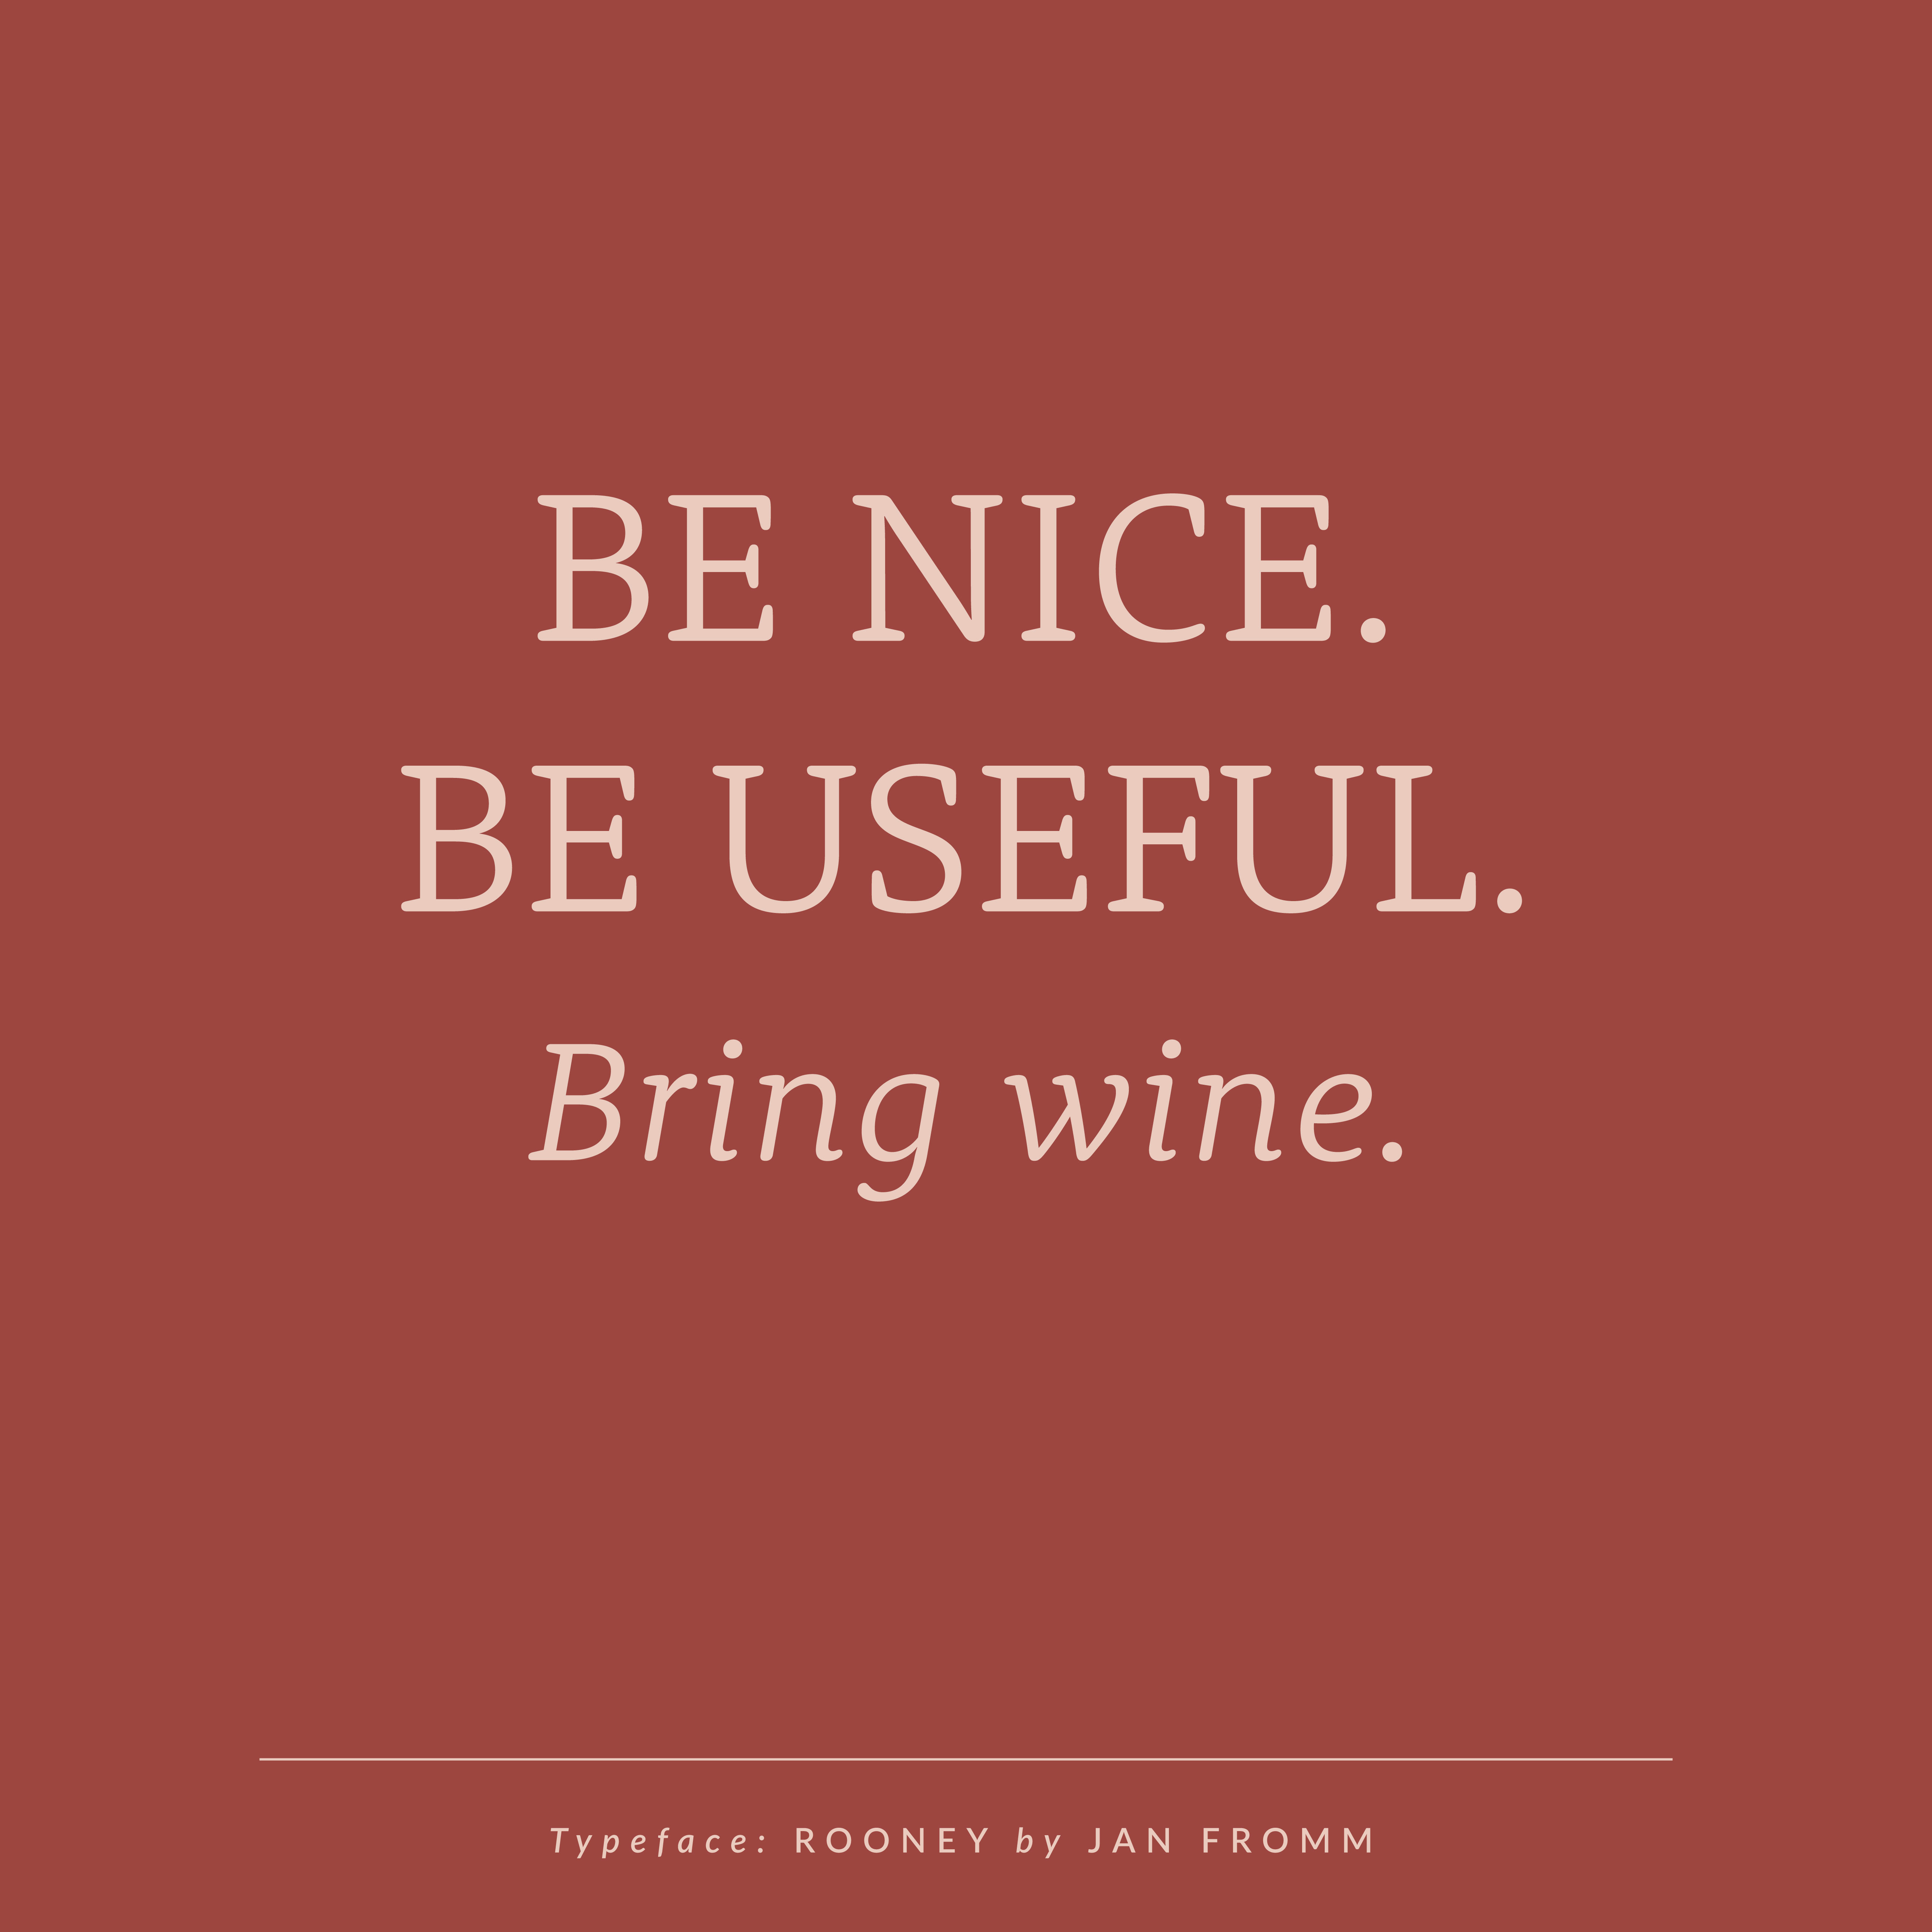 Be nice. Be useful. Bring wine. | Quotes + Typefaces